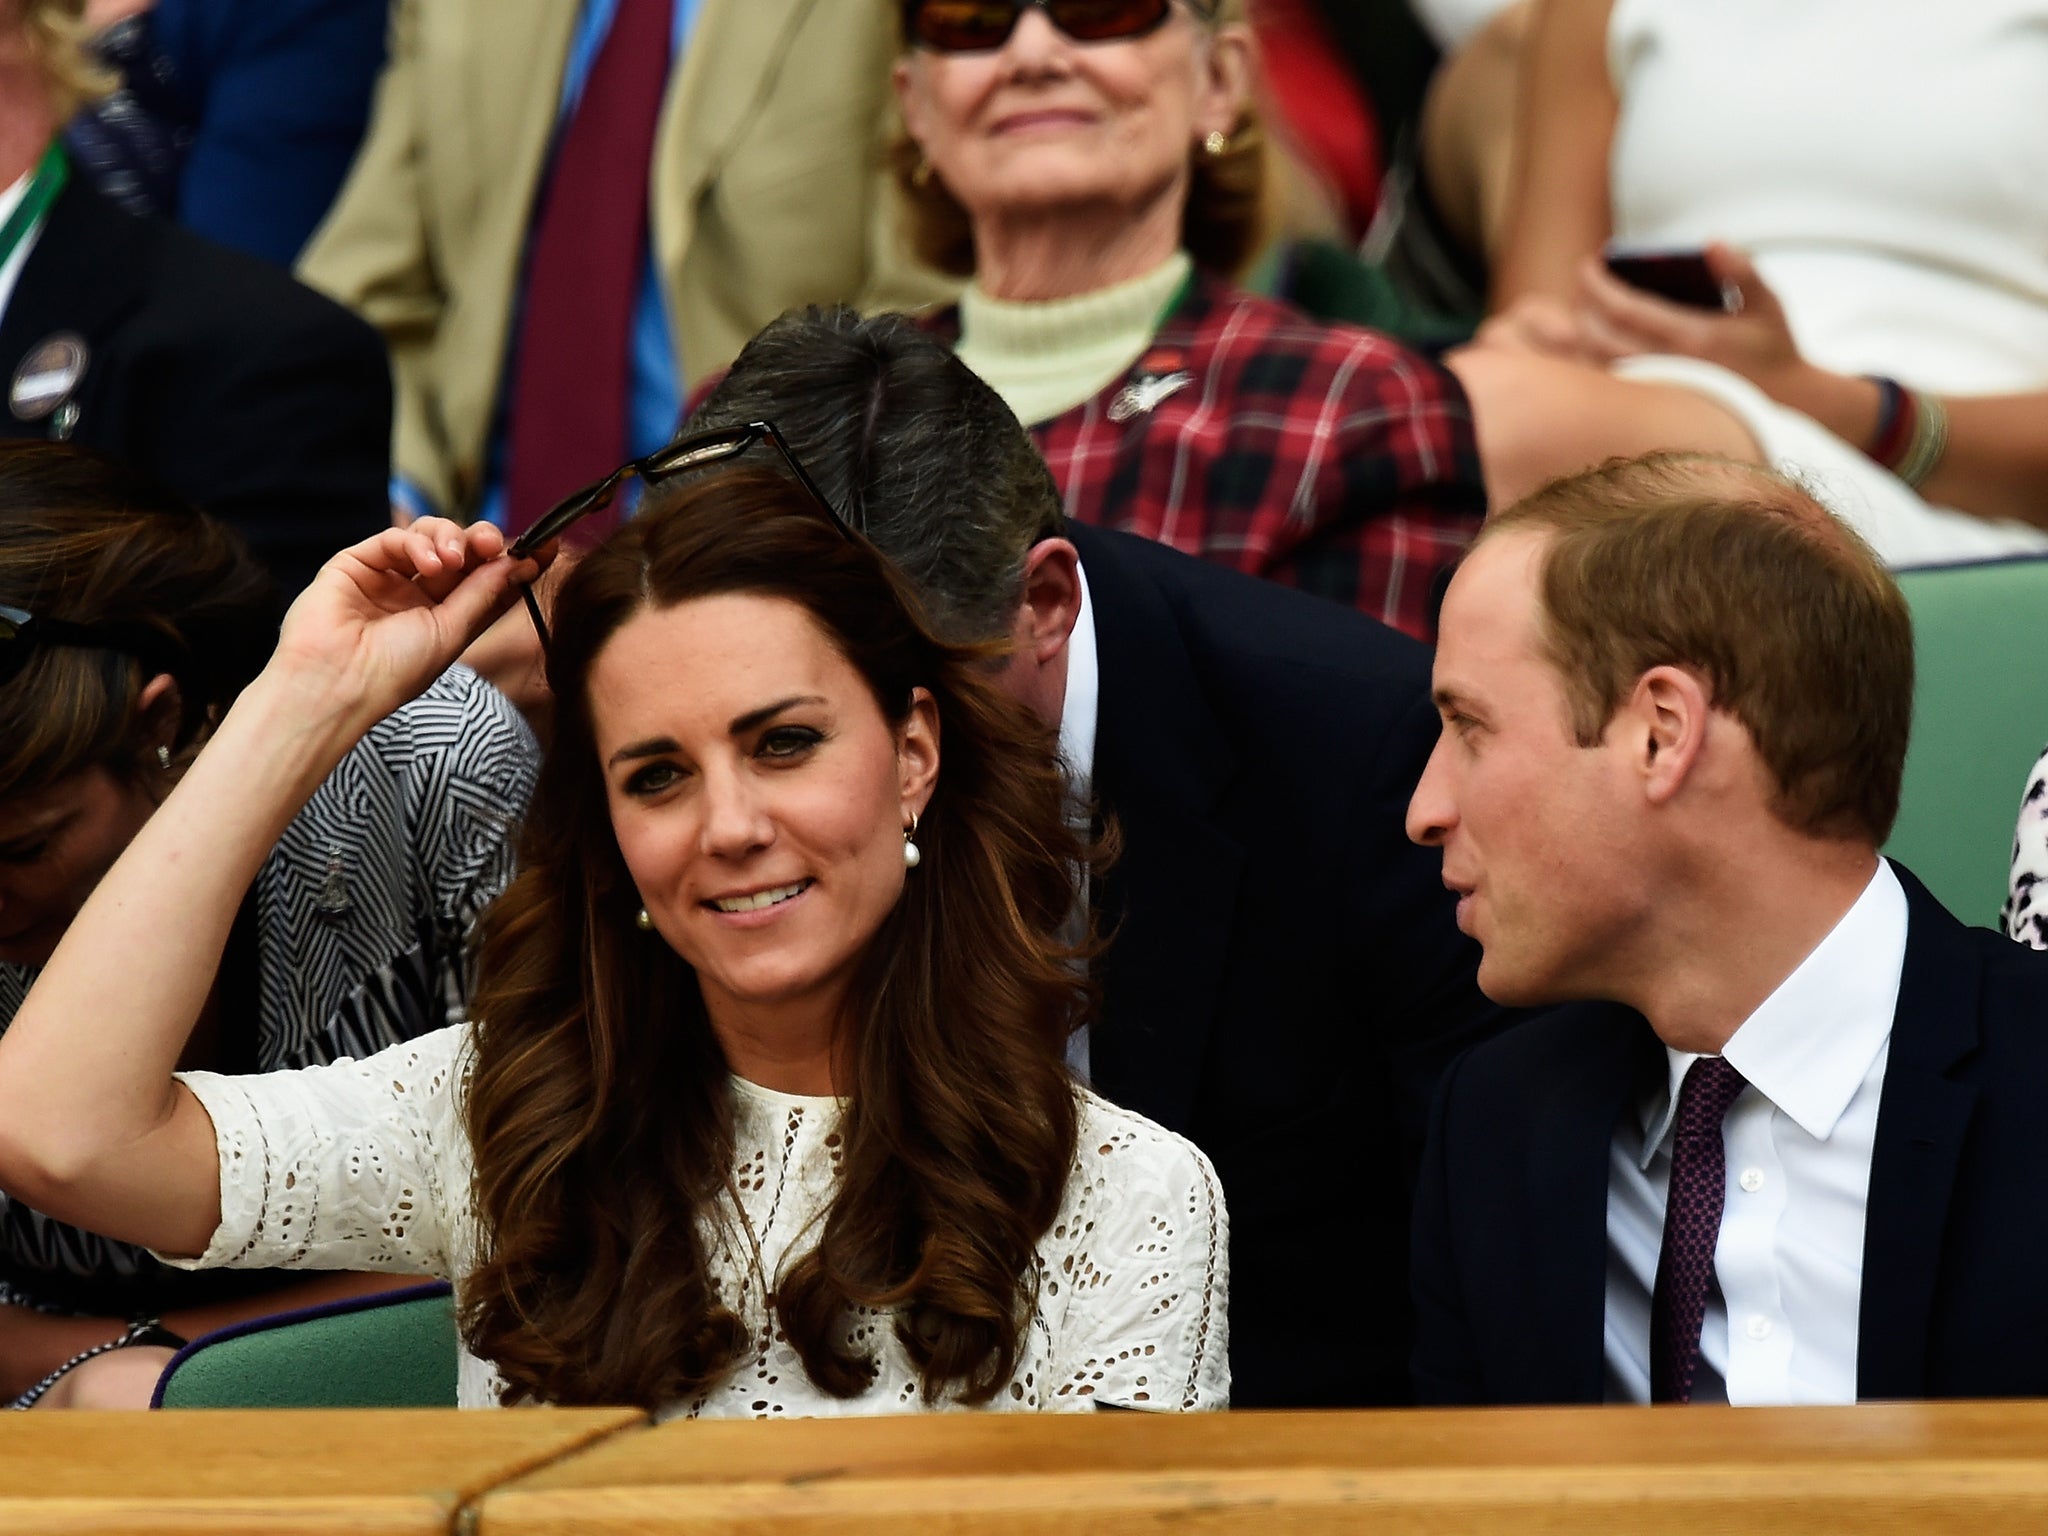 The Duke and Duchess of Cambridge watch Andy Murray lose at Wimbledon